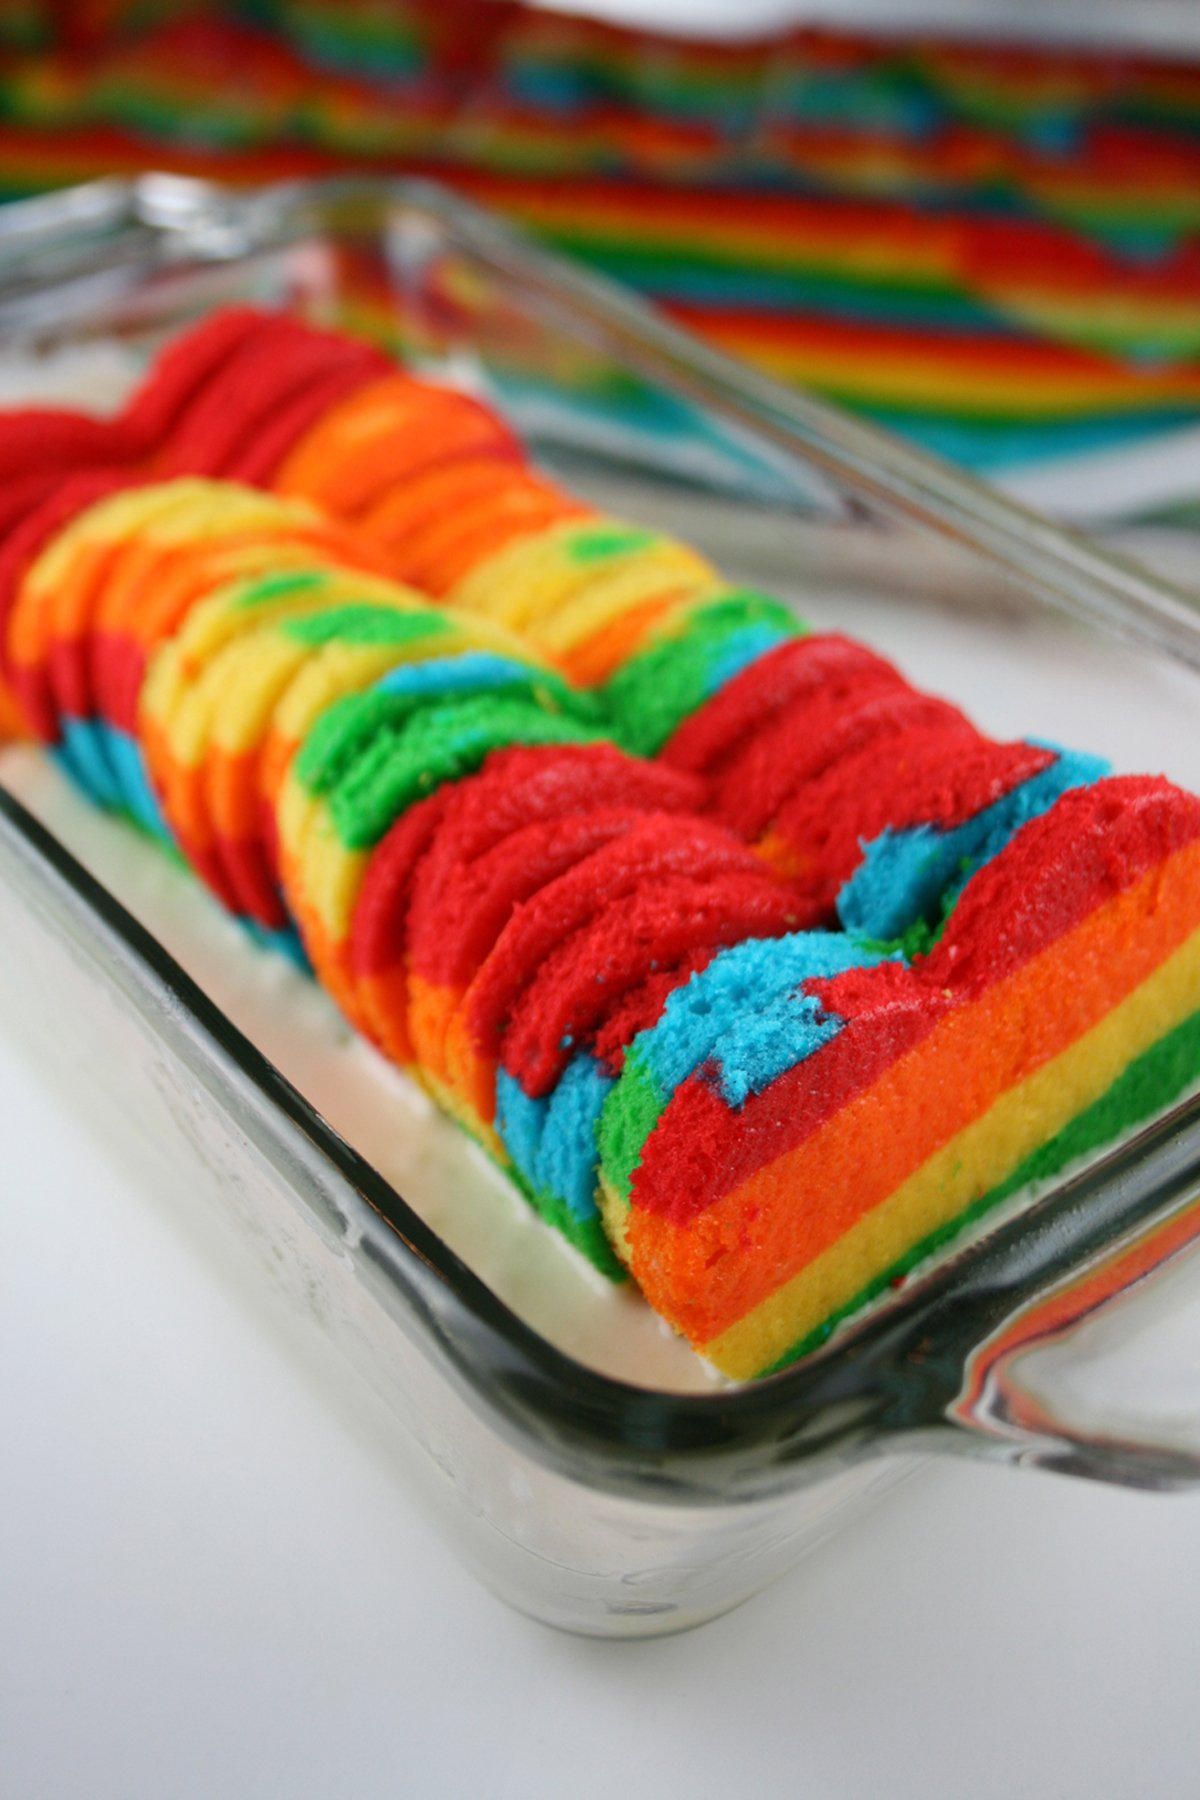 Heart shaped rainbow cake in a glass loaf pan.